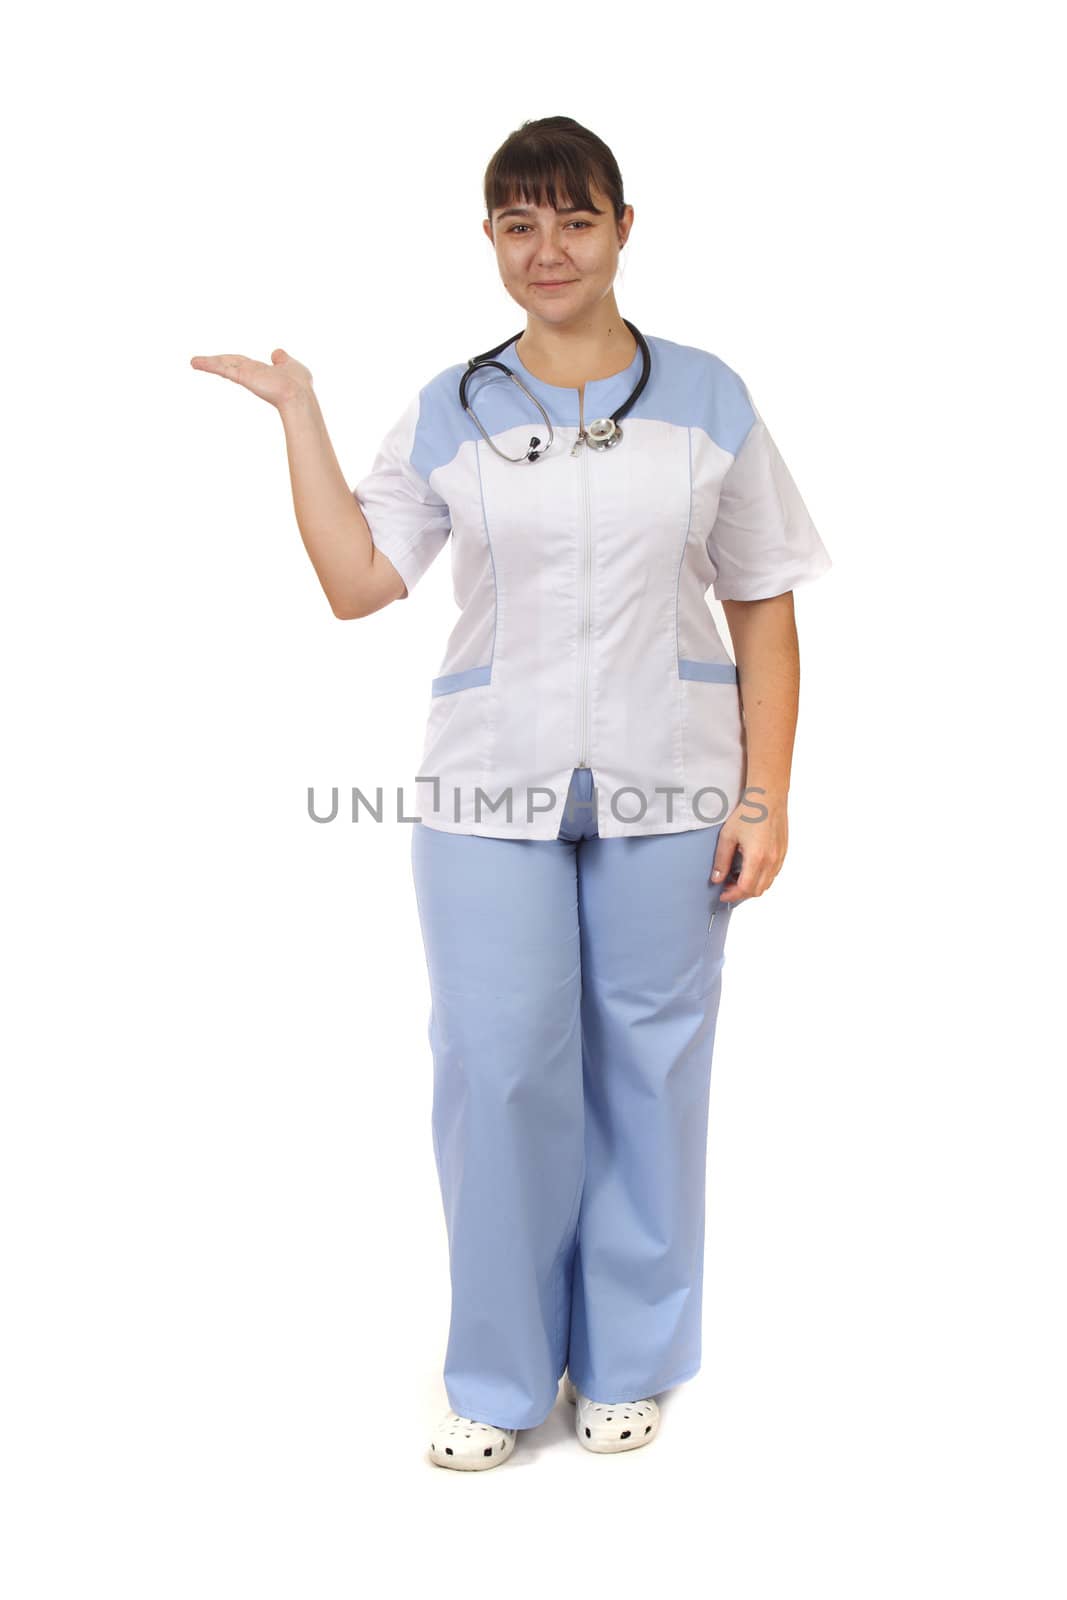 woman - medical photo on the white background